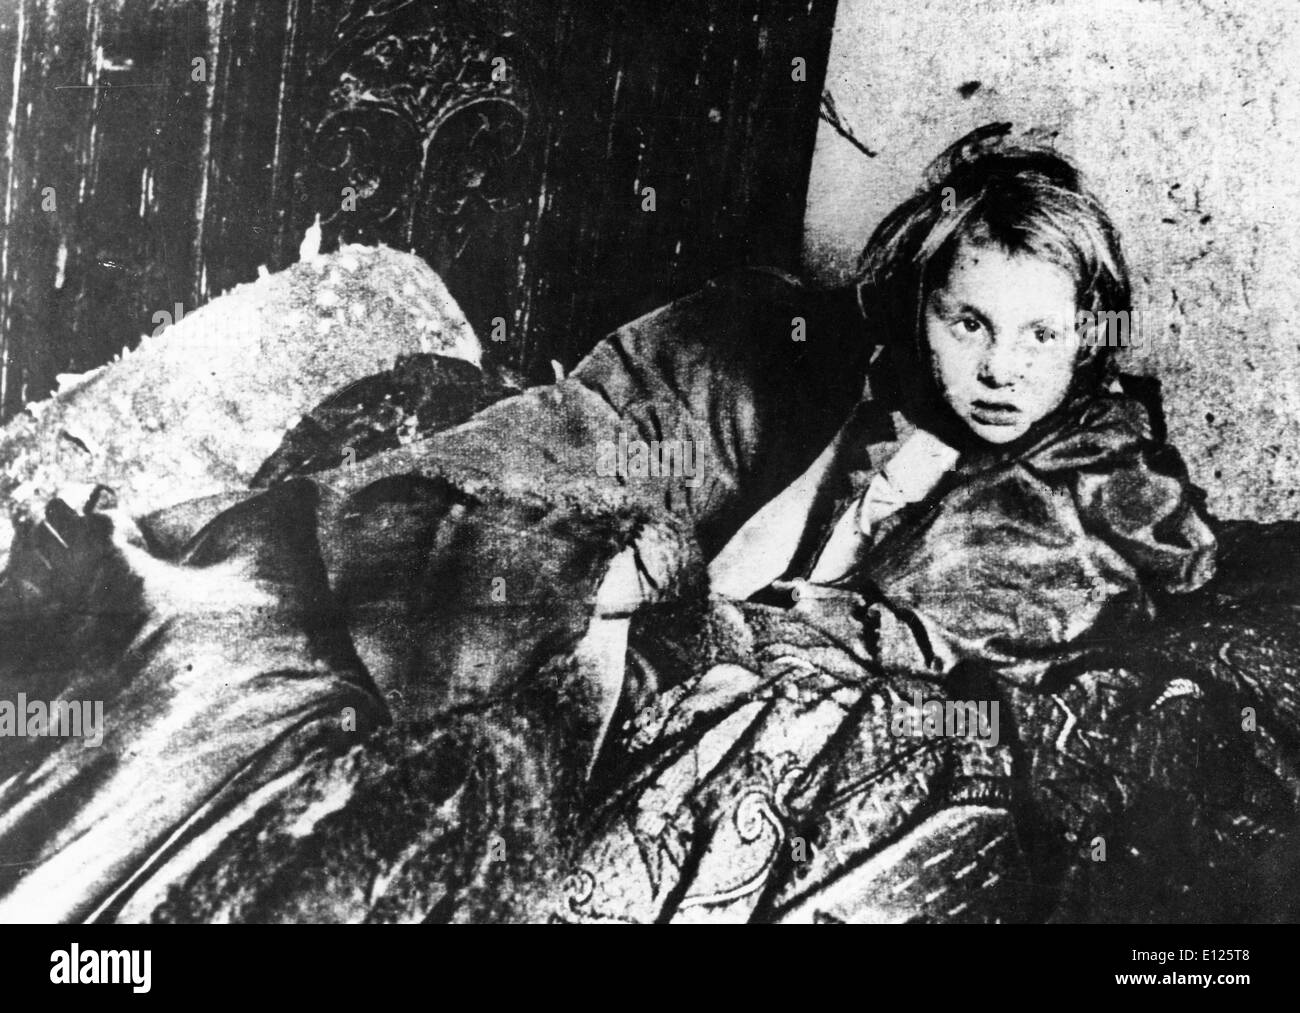 Jan 25, 2005; Warsaw, GERMANY; (File Photo. Date Unknown) A Jewish kid at the Warsaw Ghetto during the World War II.. Stock Photo